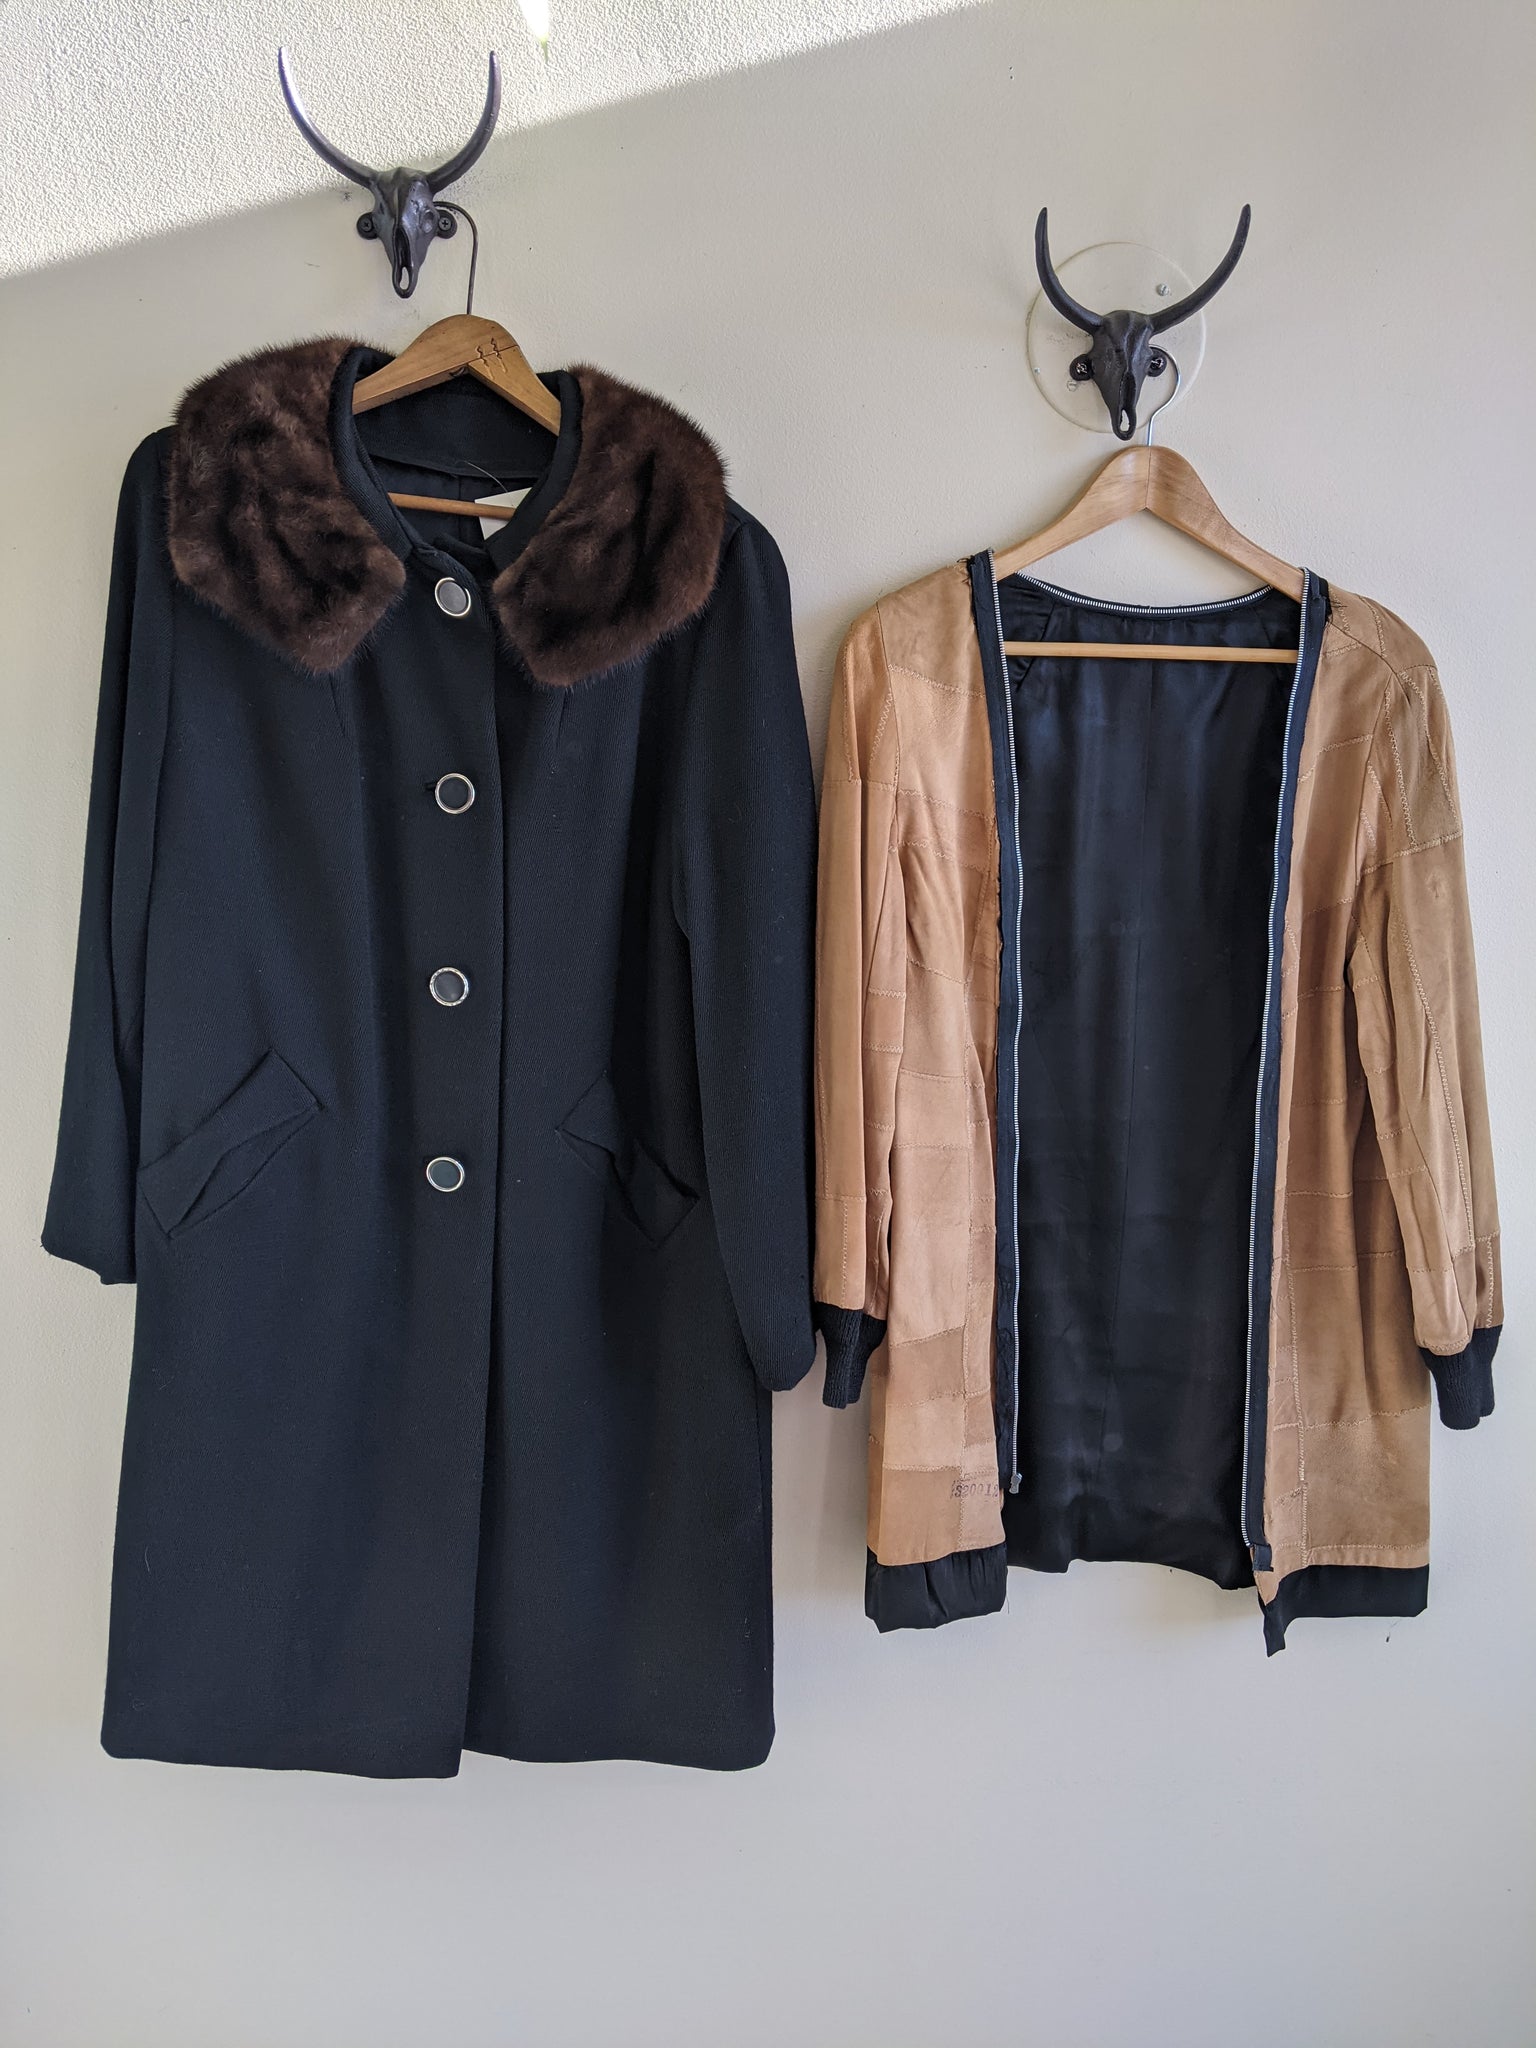 Black Wool Hudson’s Bay Coat With Leather Liner - M